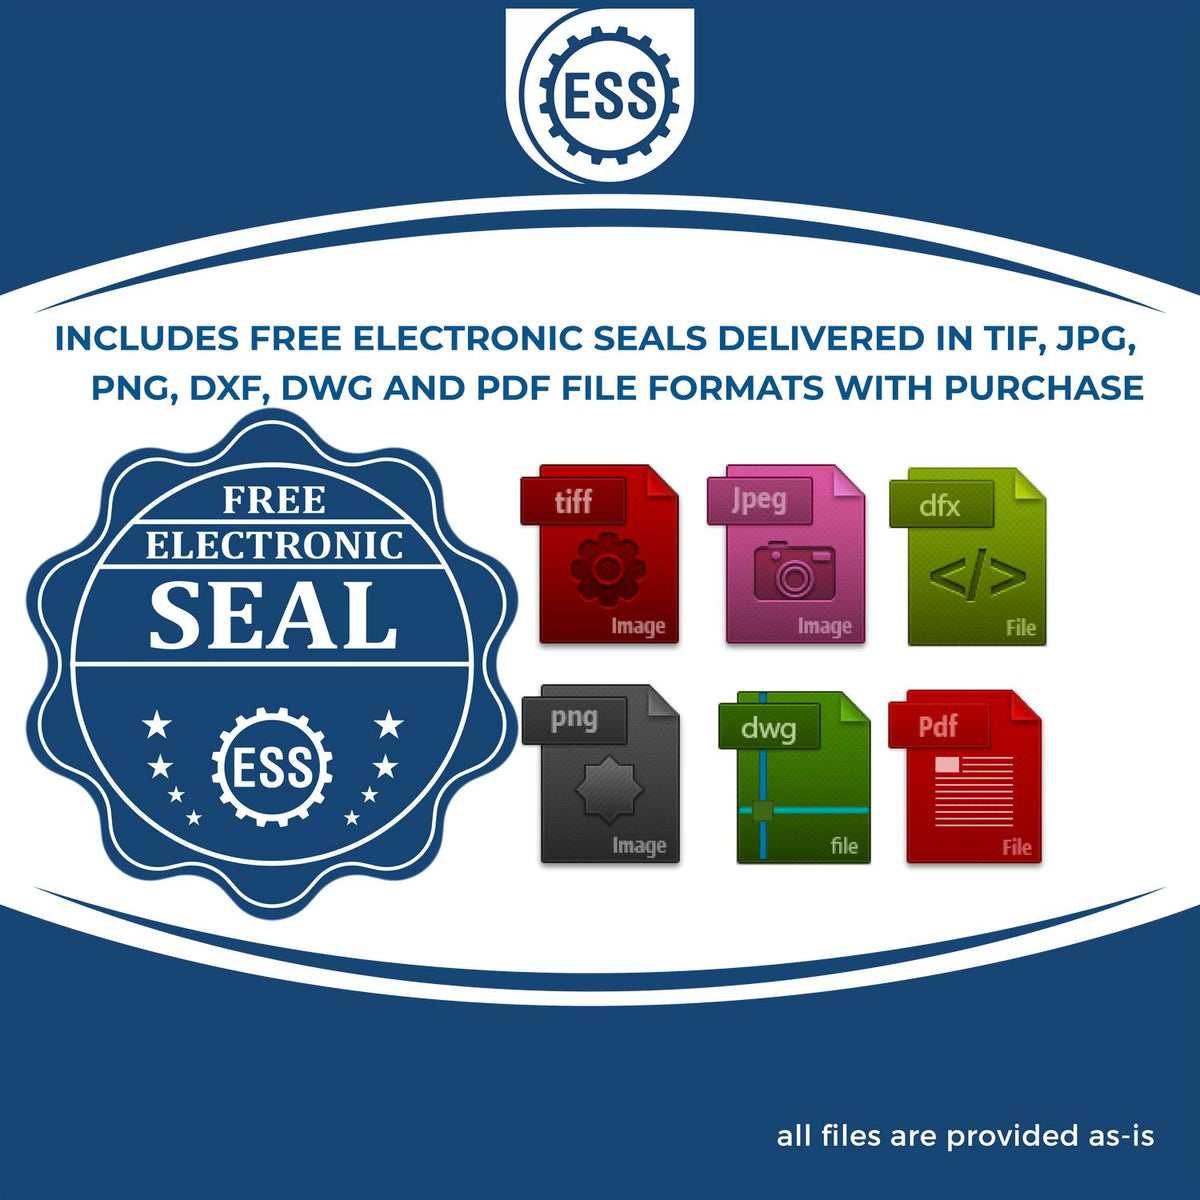 An infographic for the free electronic seal for the Slim Pre-Inked Alaska Professional Geologist Seal Stamp illustrating the different file type icons such as DXF, DWG, TIF, JPG and PNG.